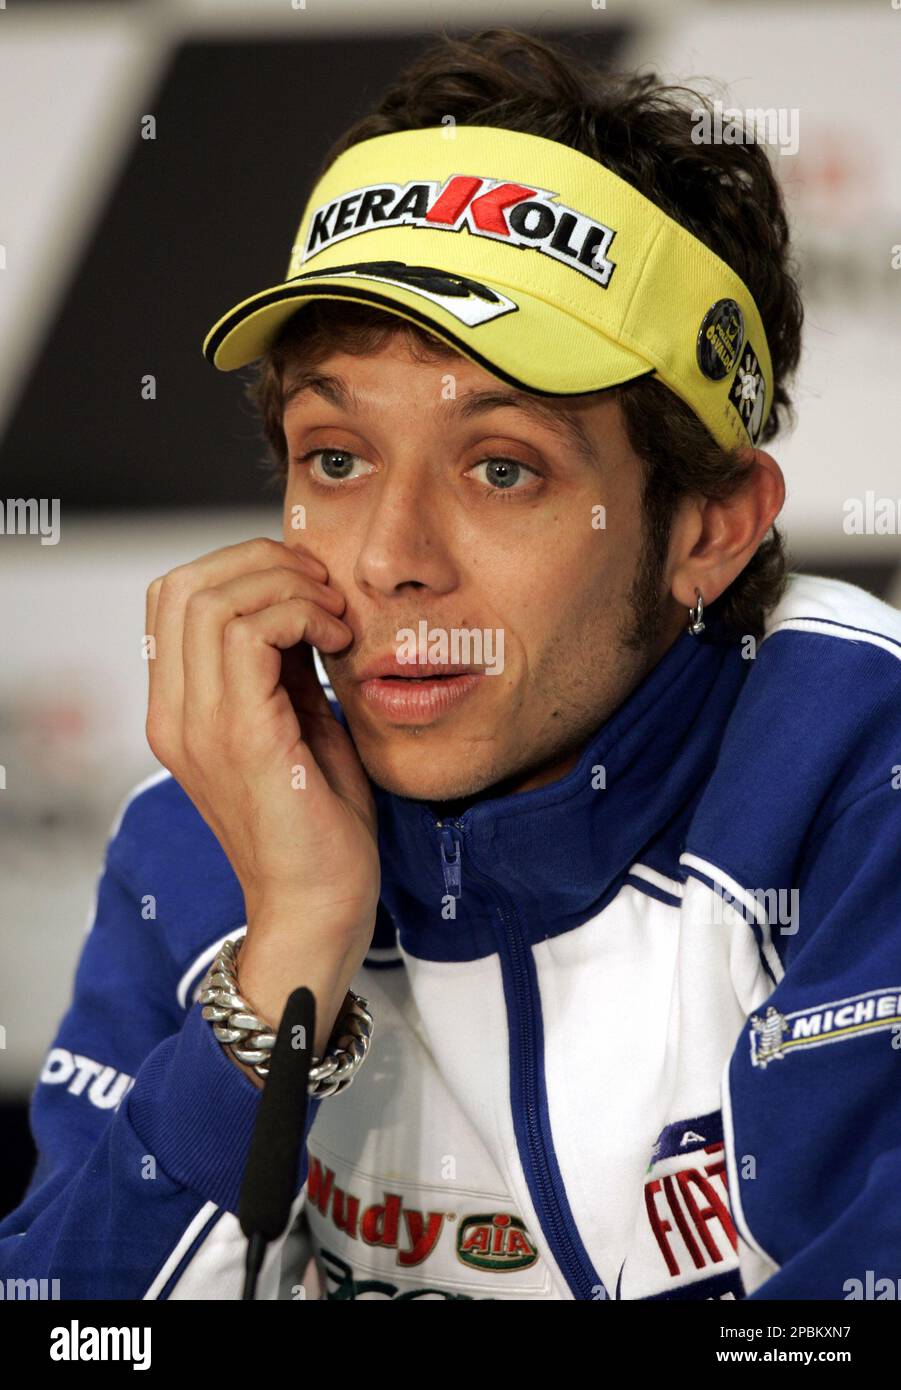 Fiat Yamaha Moto GP rider Valentino Rossi of Italy is seen during a press  conference at the Istanbul Park racing track in Istanbul, Turkey, Thursday,  April 19, 2007. The Moto GP Turkish